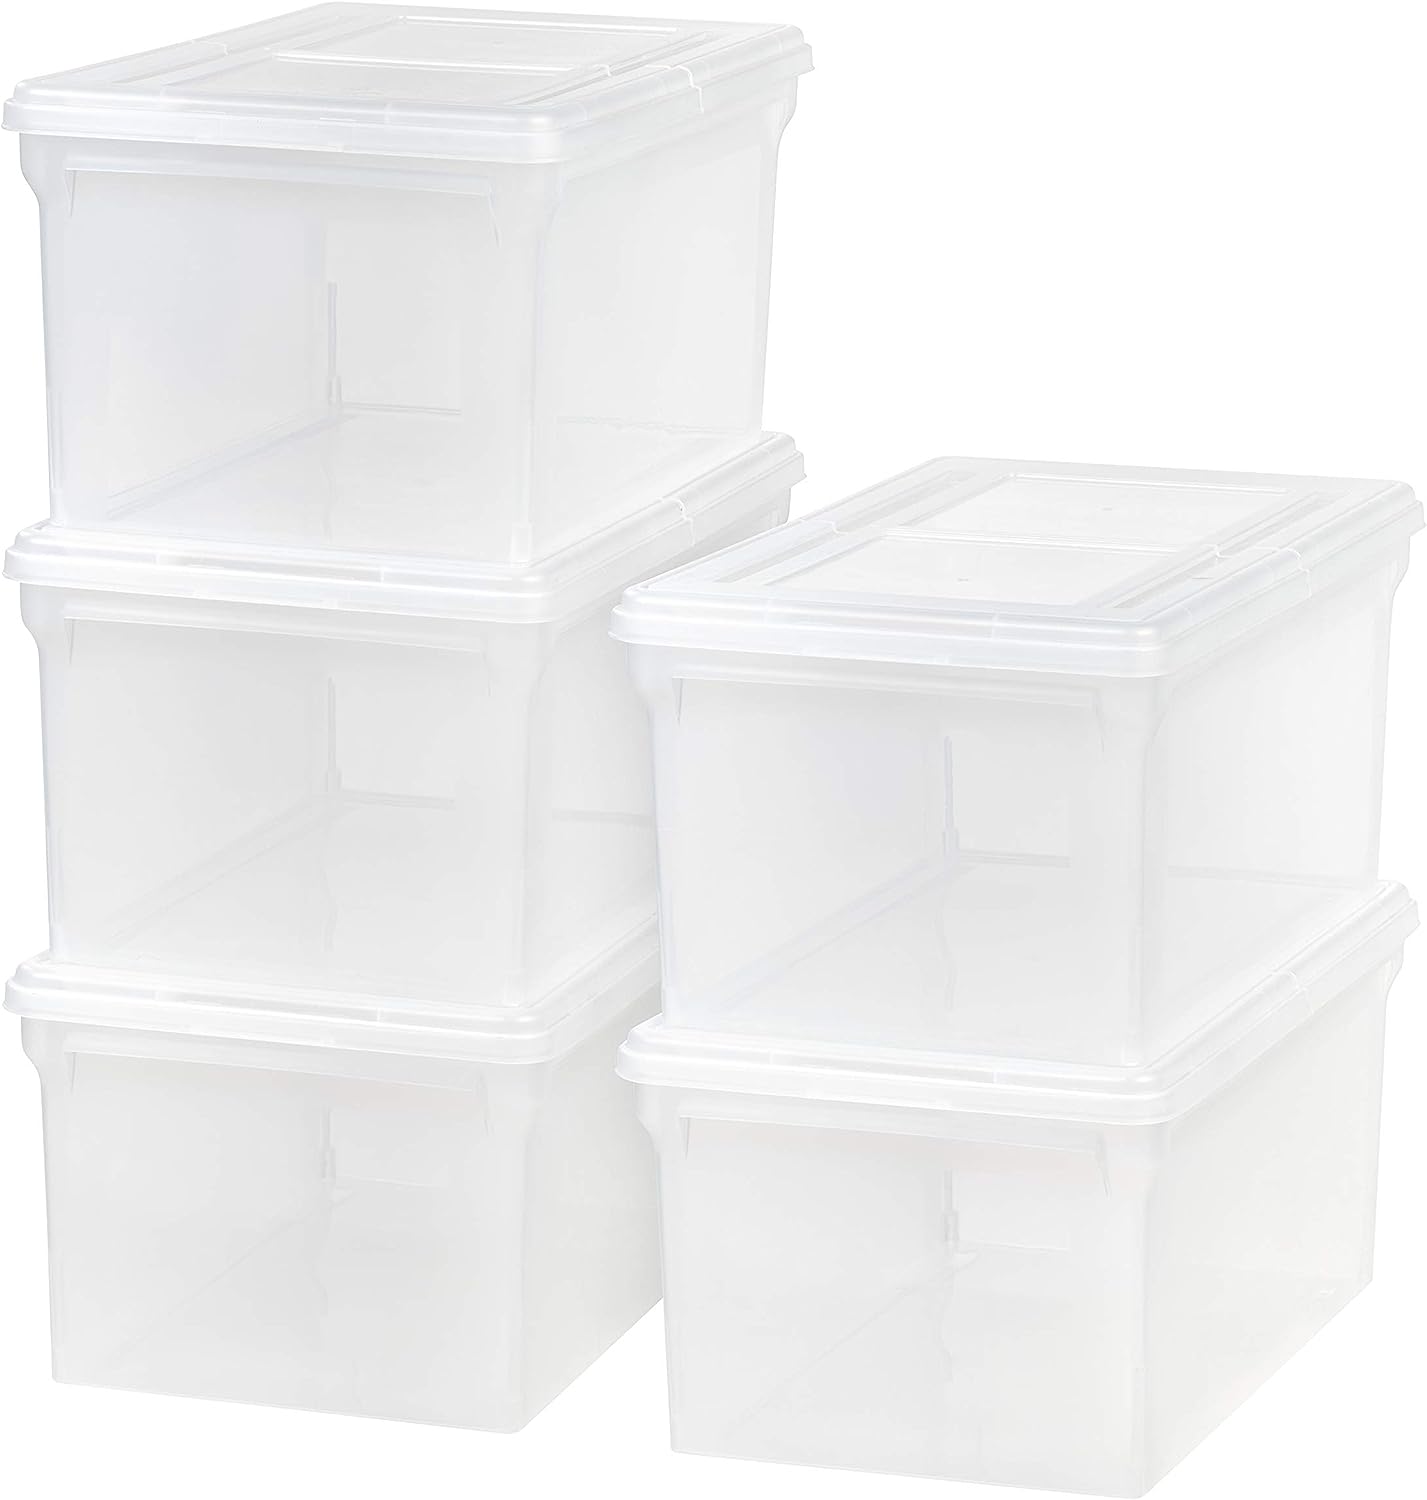 RHBLME 4 Pack Plastic Storage Bins with Lids, Multi-Purpose Storage  Containers with Buckle Stackable File Storage Box for Organizing A4 Paper  Photo